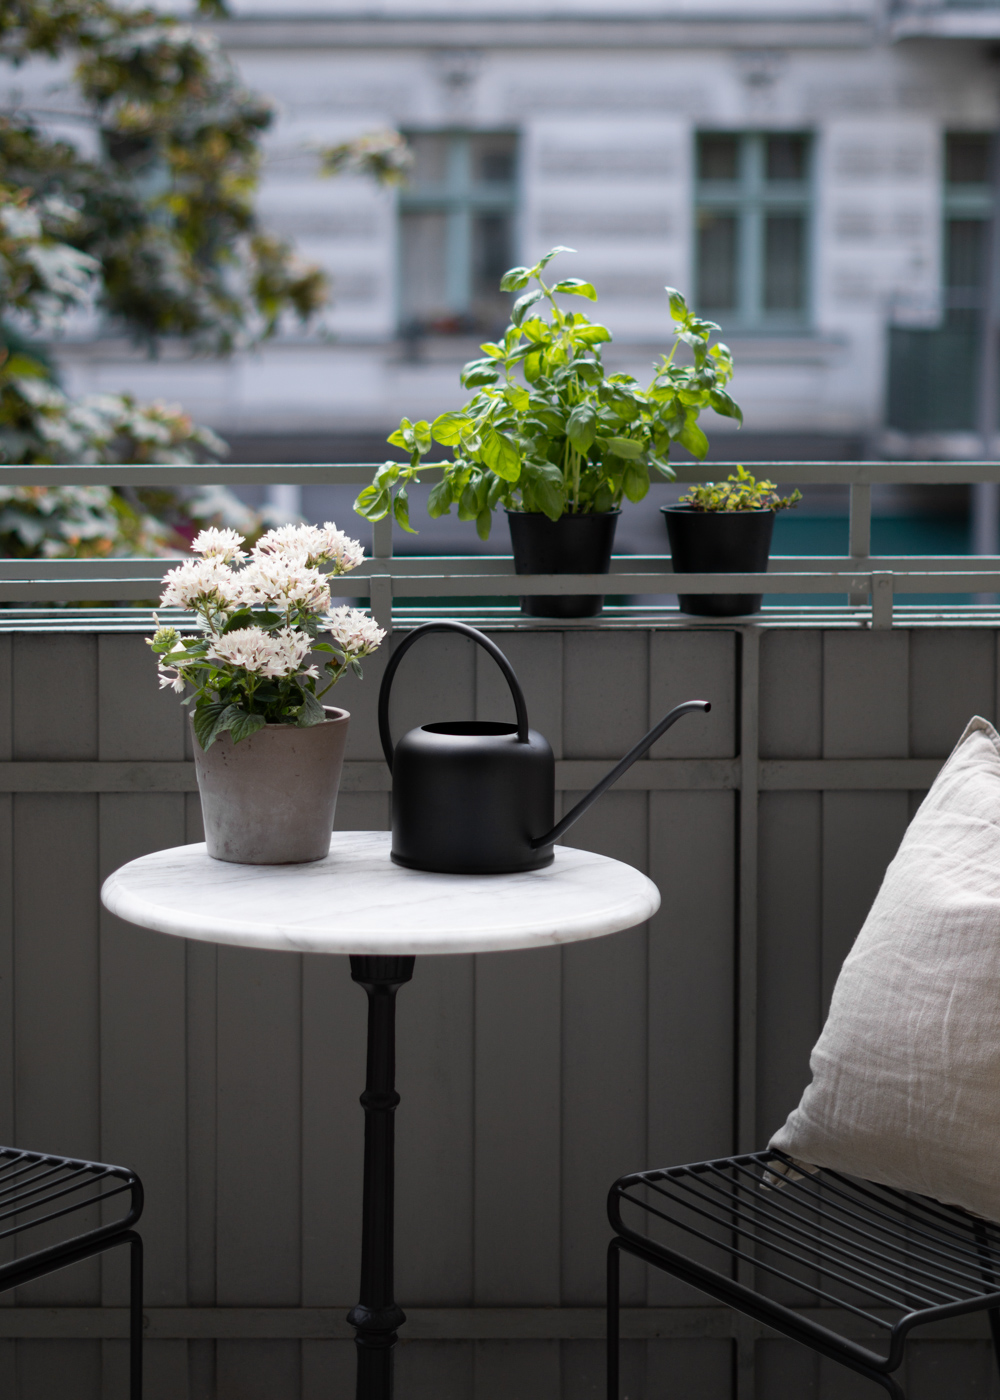 H&M Home, Balcony Styling, Summer Vibes, Marble Cafe Table, Water Can, Plants, Herb Garden - Neutral Home, Scandinavian Interior, Natural Aesthetic, Minimalist Decor, Beige Style, RG Daily Blog